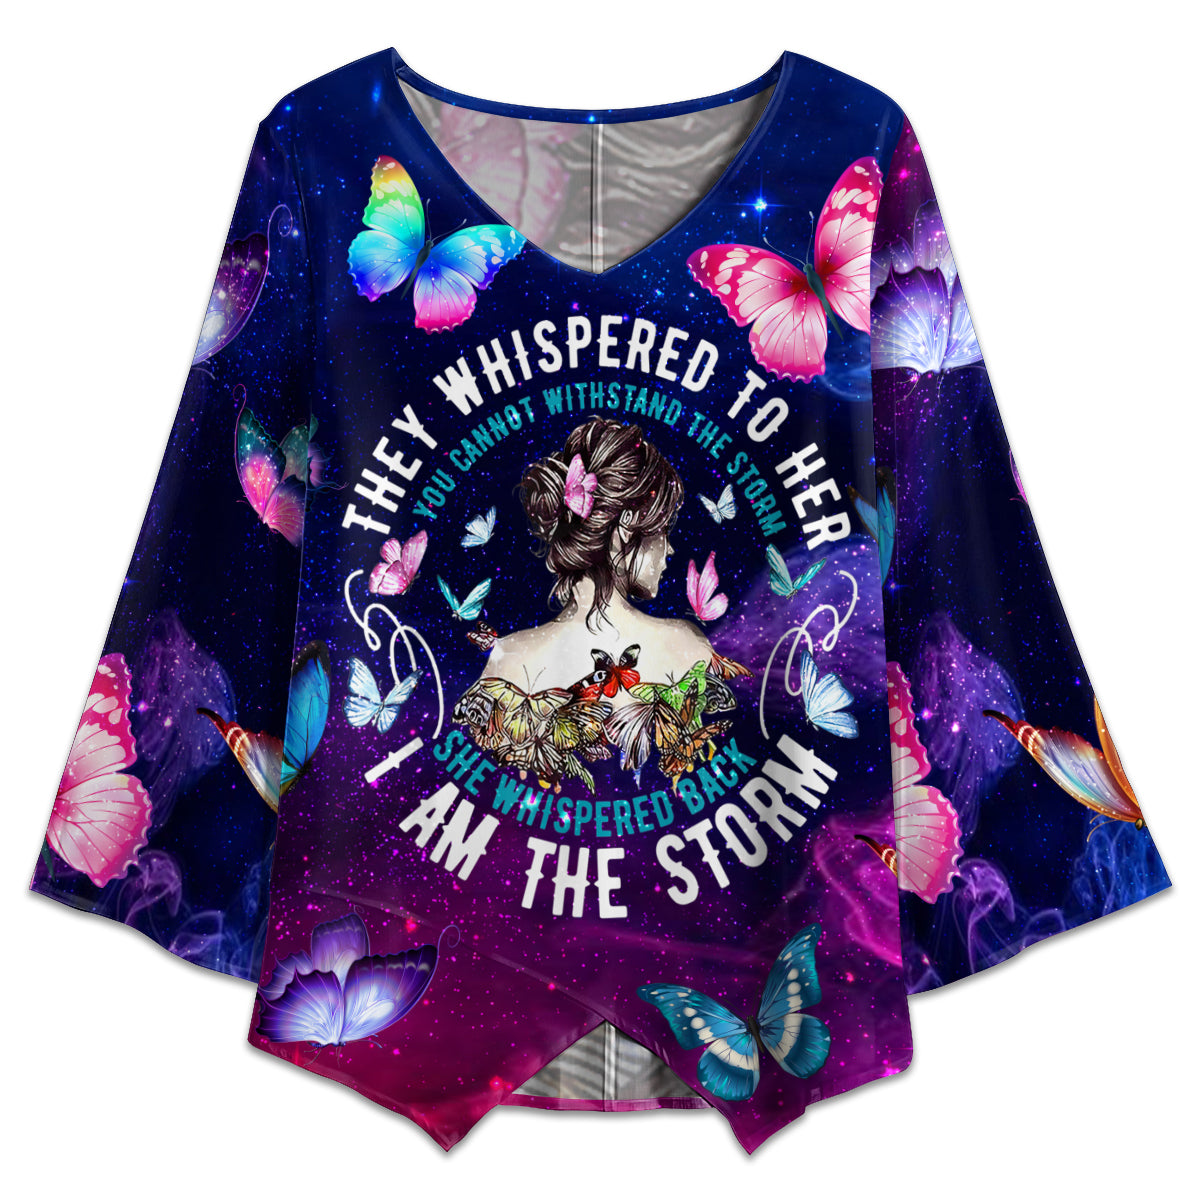 S Hippie They Whispered To Her You Cannot Withstand The Storm - V-neck T-shirt - Owls Matrix LTD